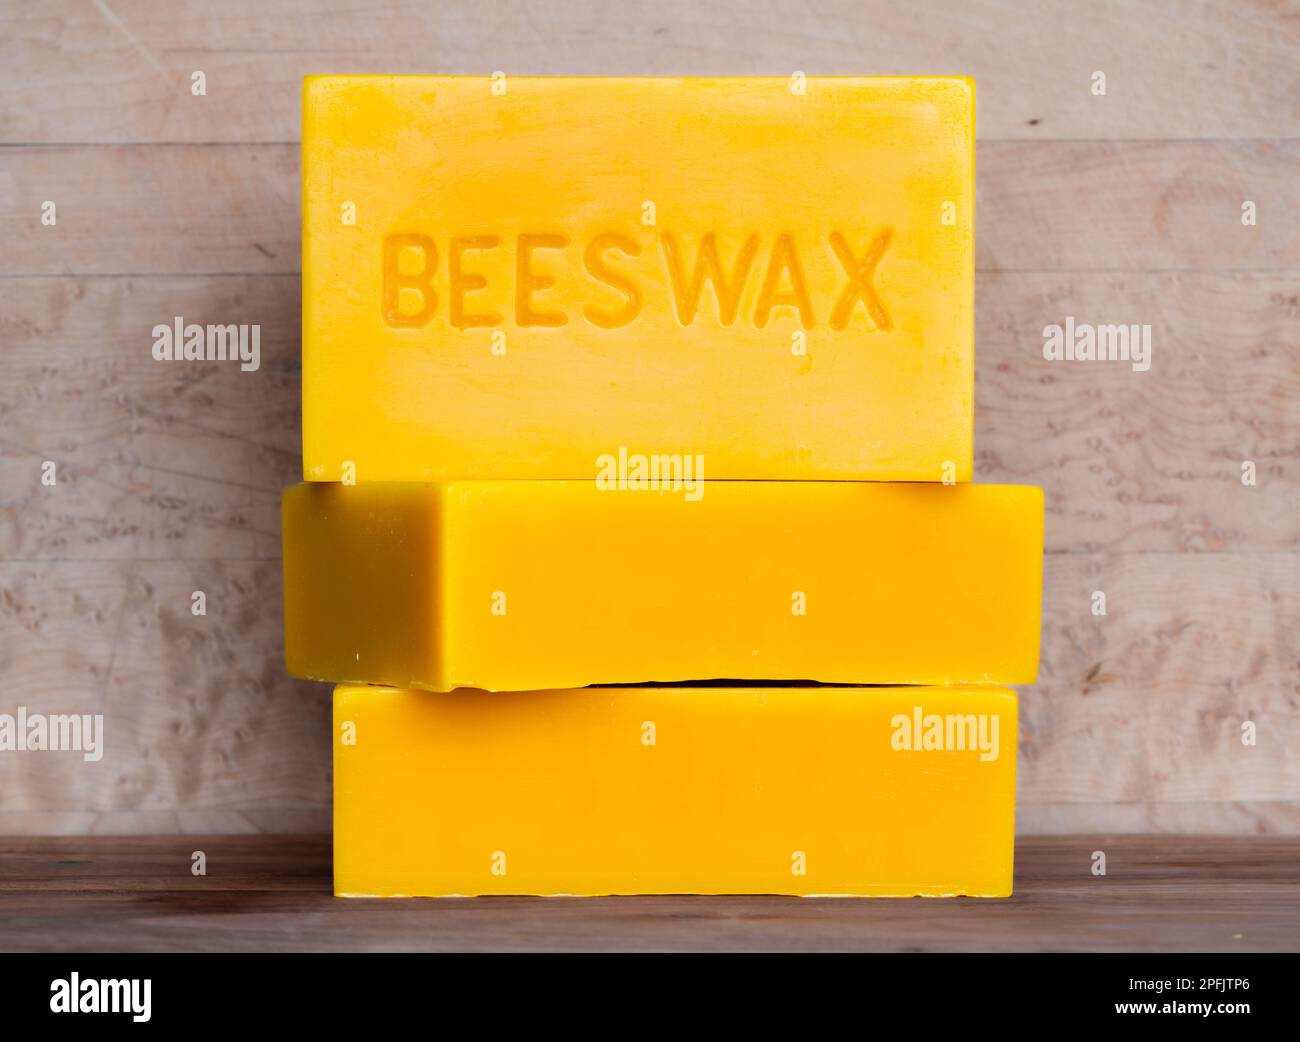 Three bricks of pure bees wax stacked against a wood background Stock Photo